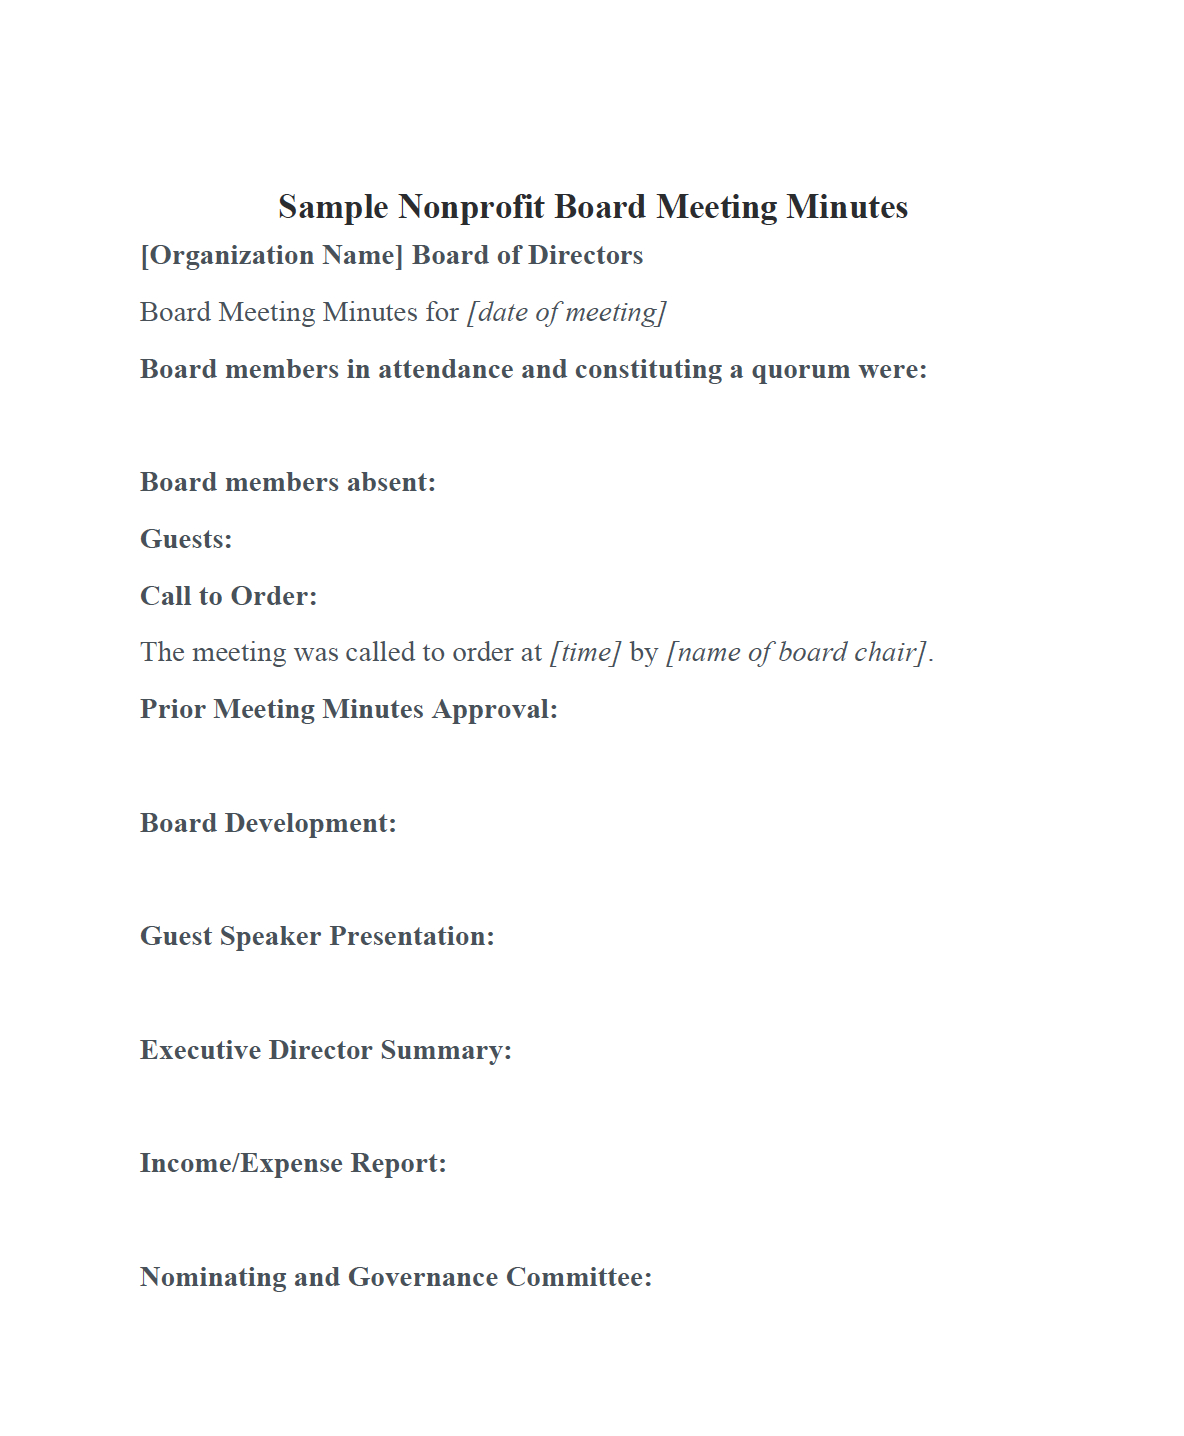 Nonprofit Board Meeting Minutes Template Diligent Insights inside dimensions 1184 X 1436